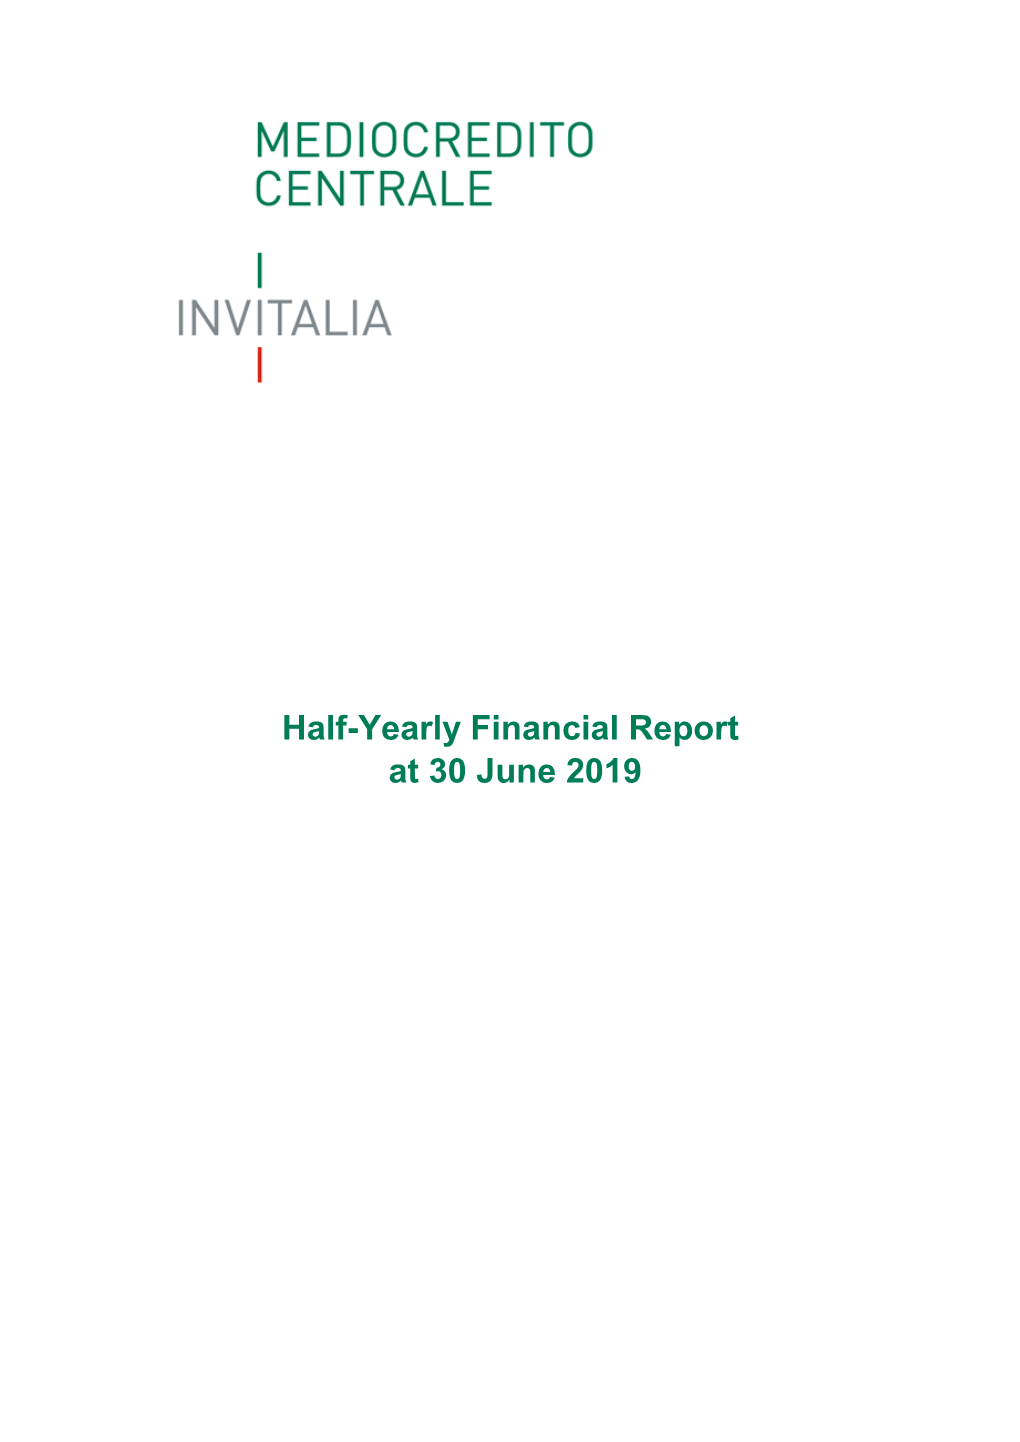 Half-Yearly Financial Report at 30 June 2019